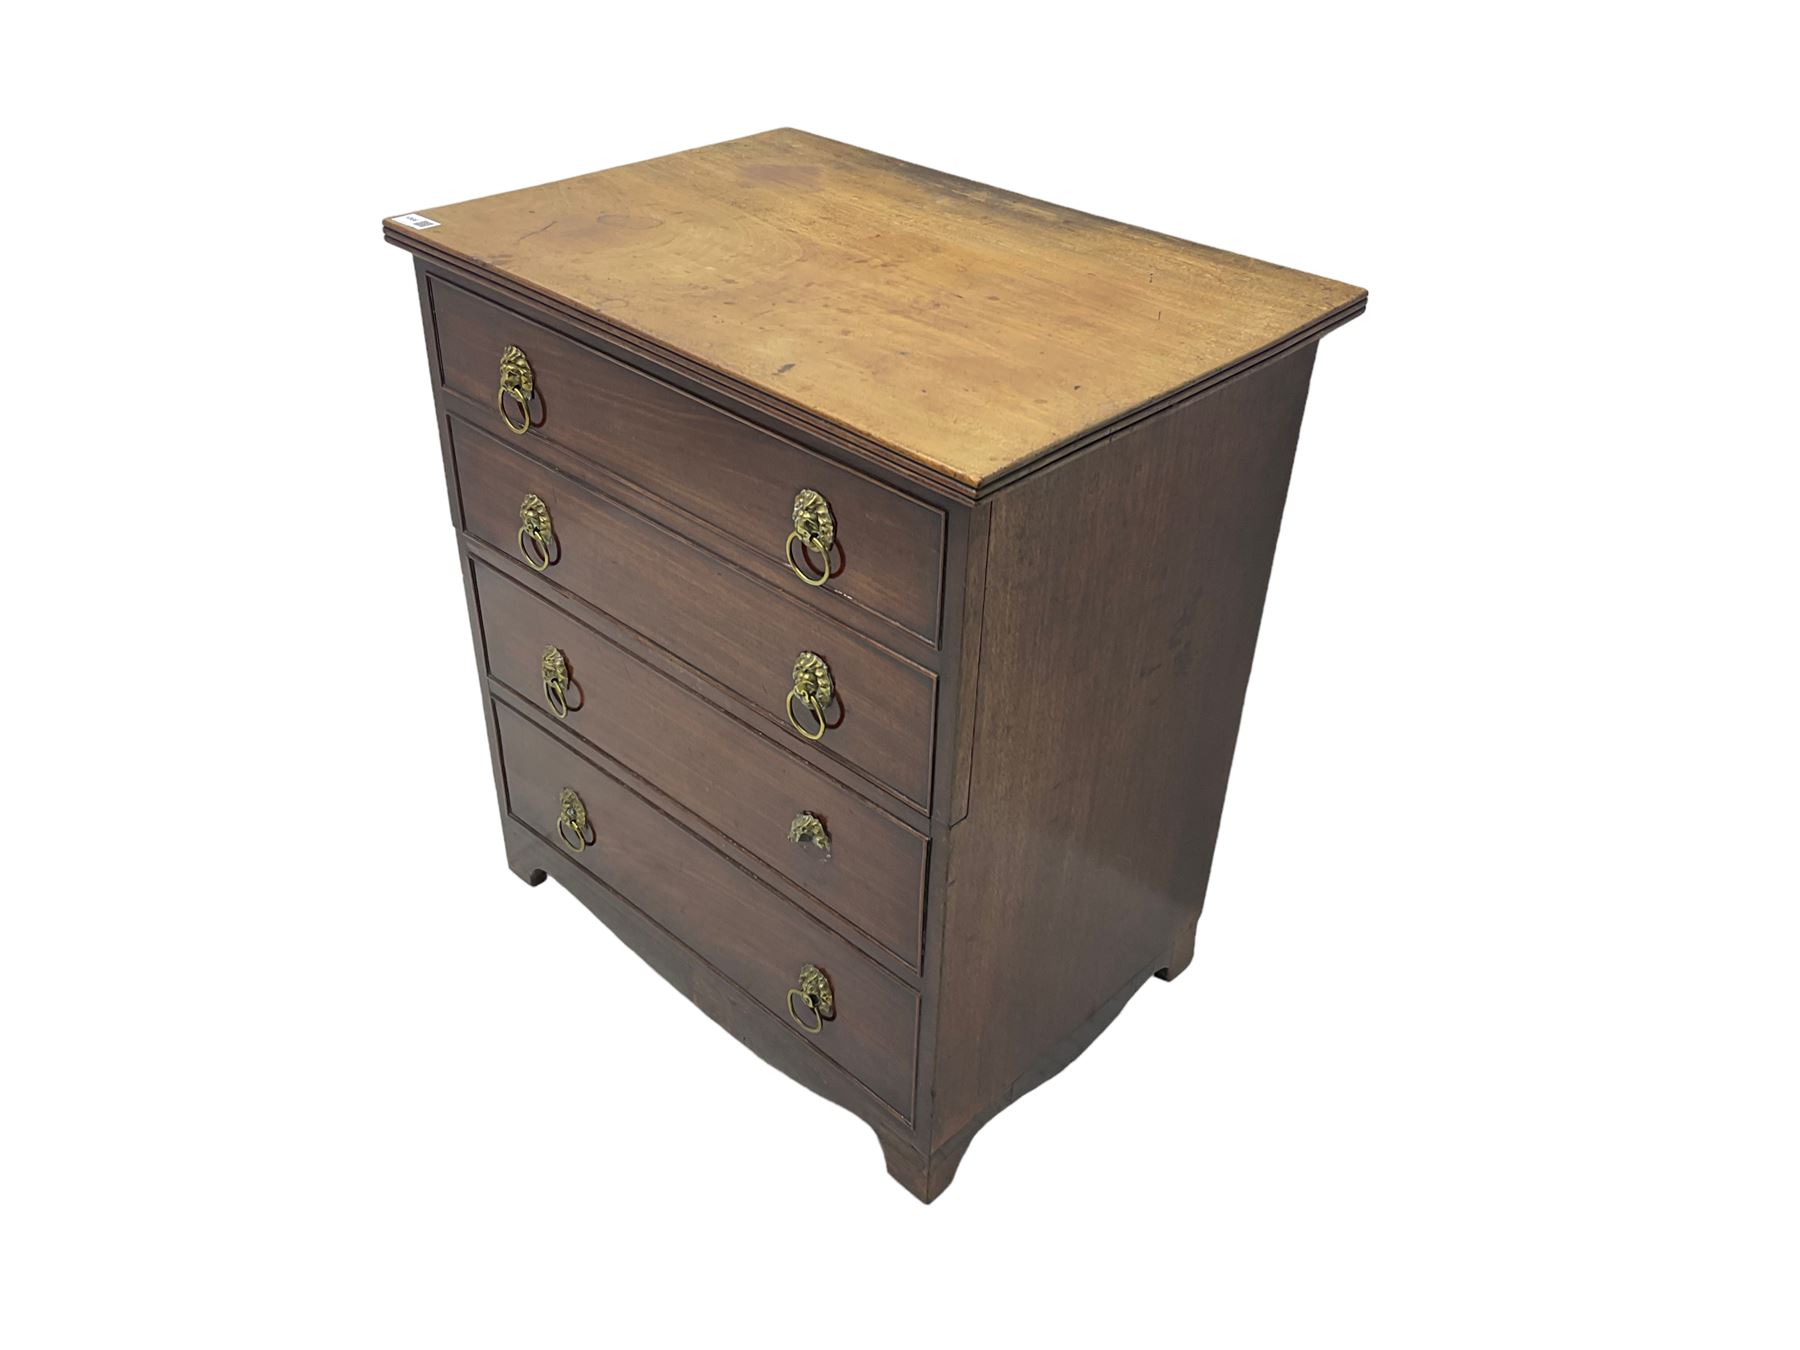 Early 19th century mahogany commode chest - Image 6 of 7